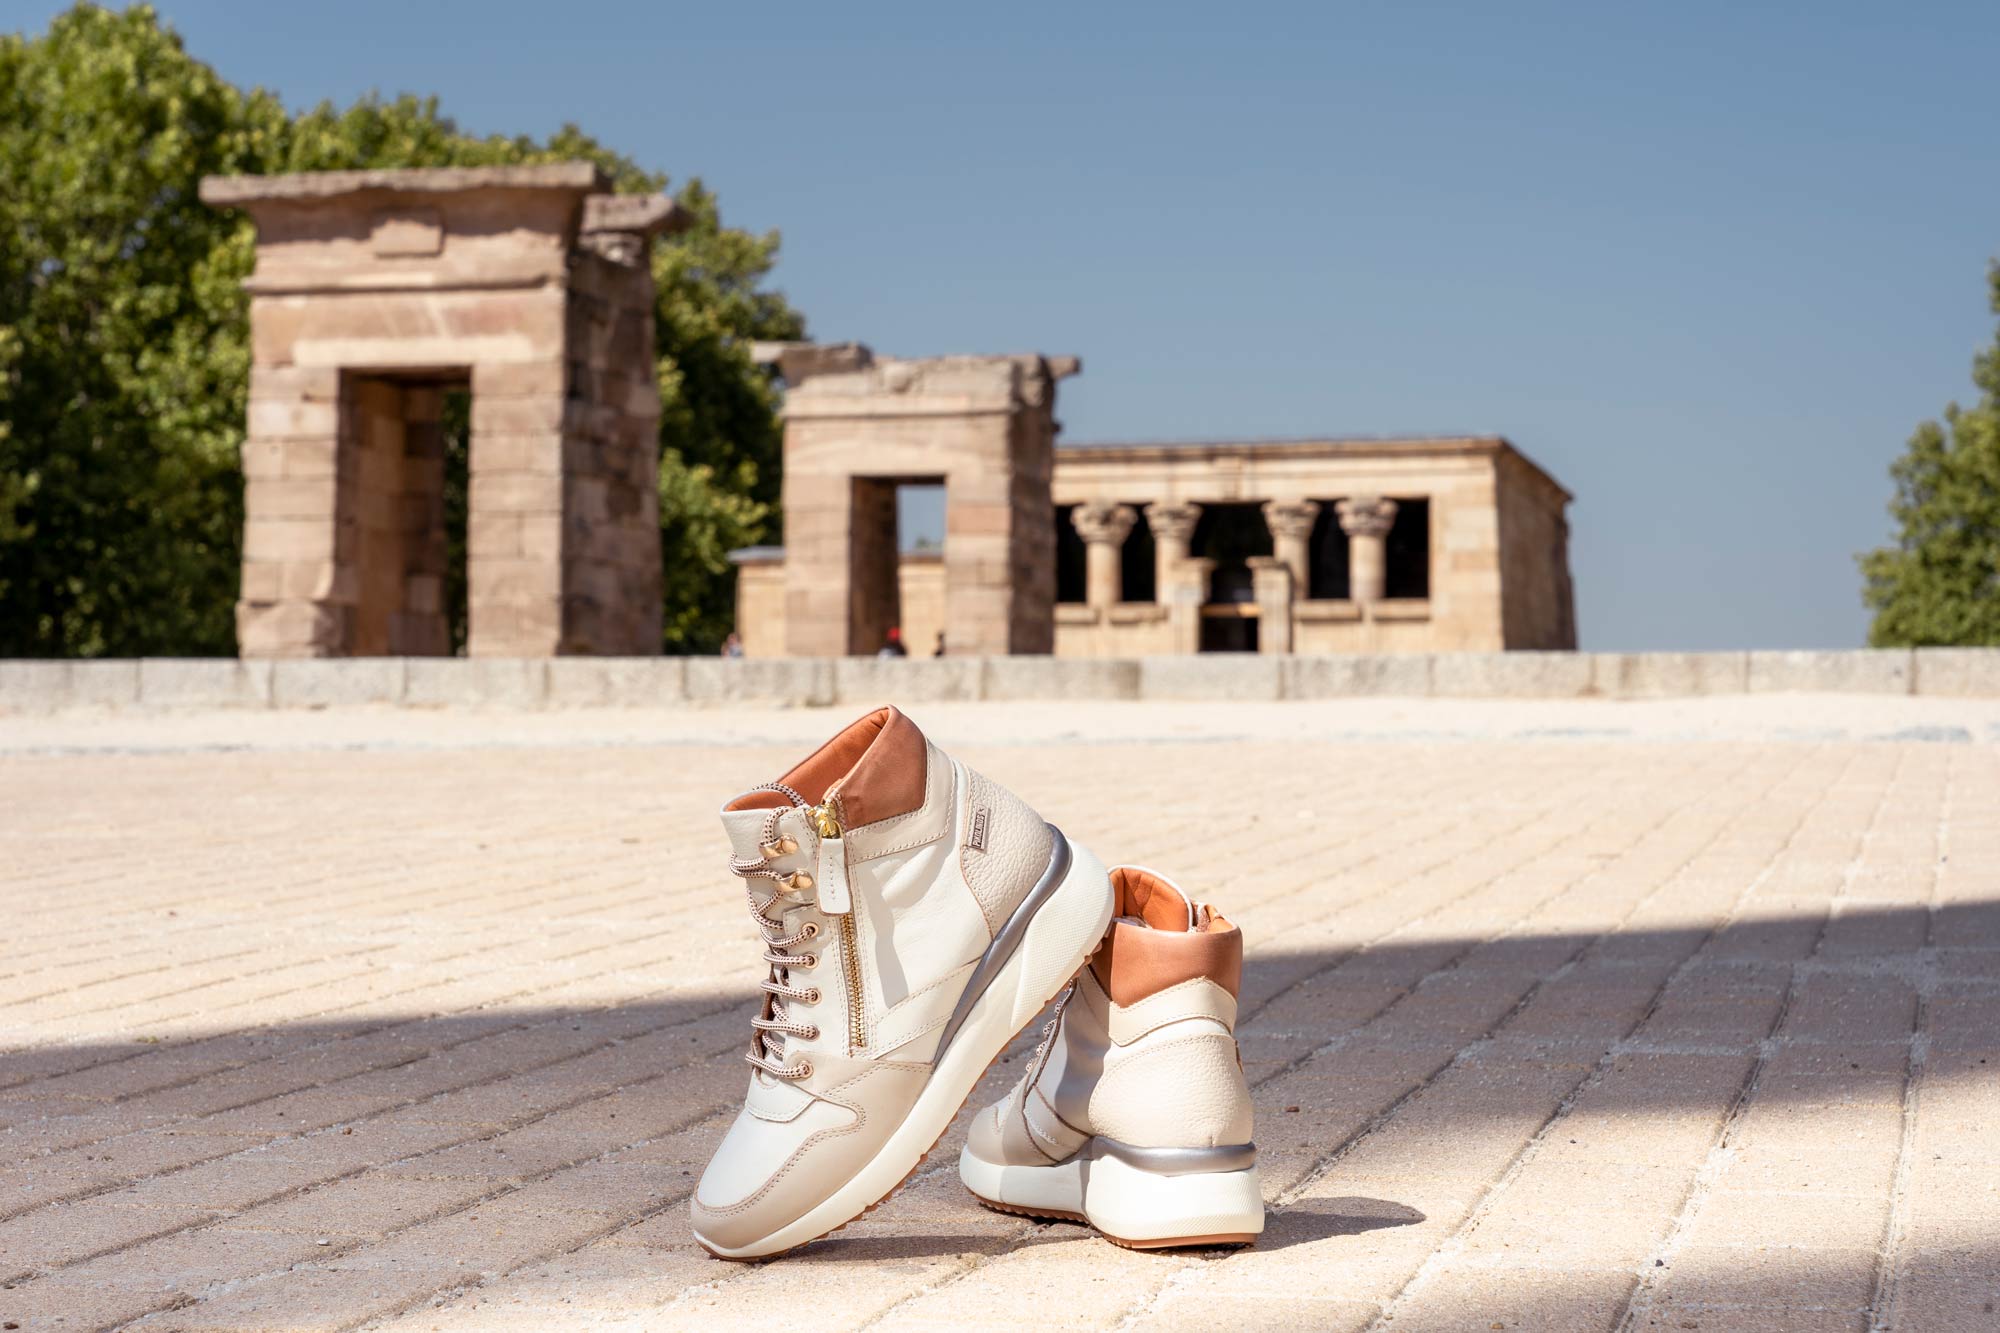 Image of a pair of Pikolinos shoes with monuments in the background.